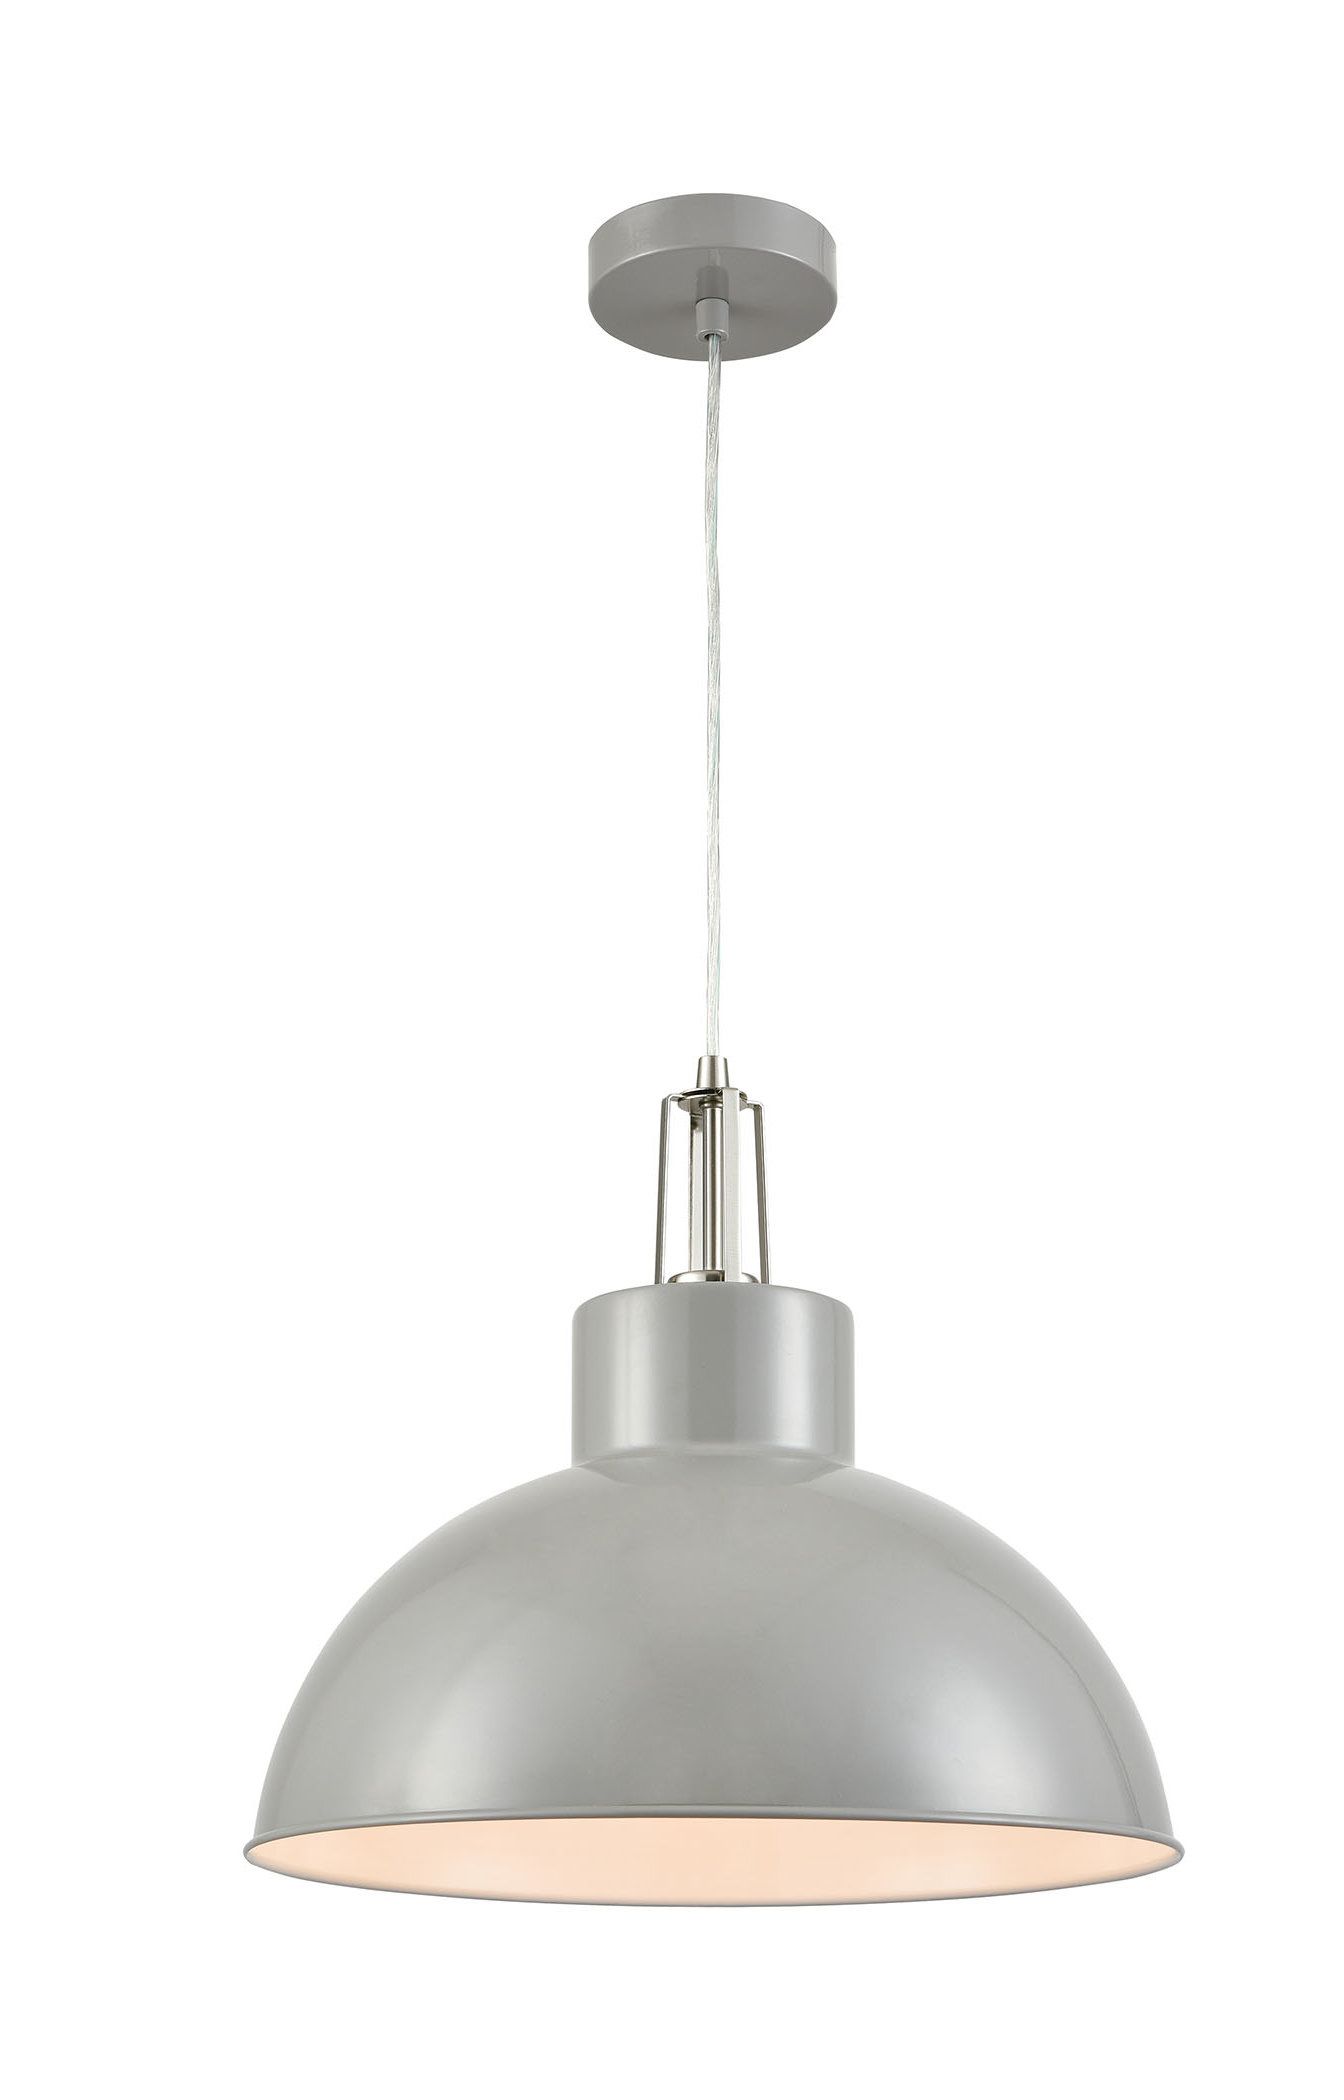 Current Ninette 1 Light Dome Pendants With Naoma 1 Light Dome Pendant (View 21 of 25)